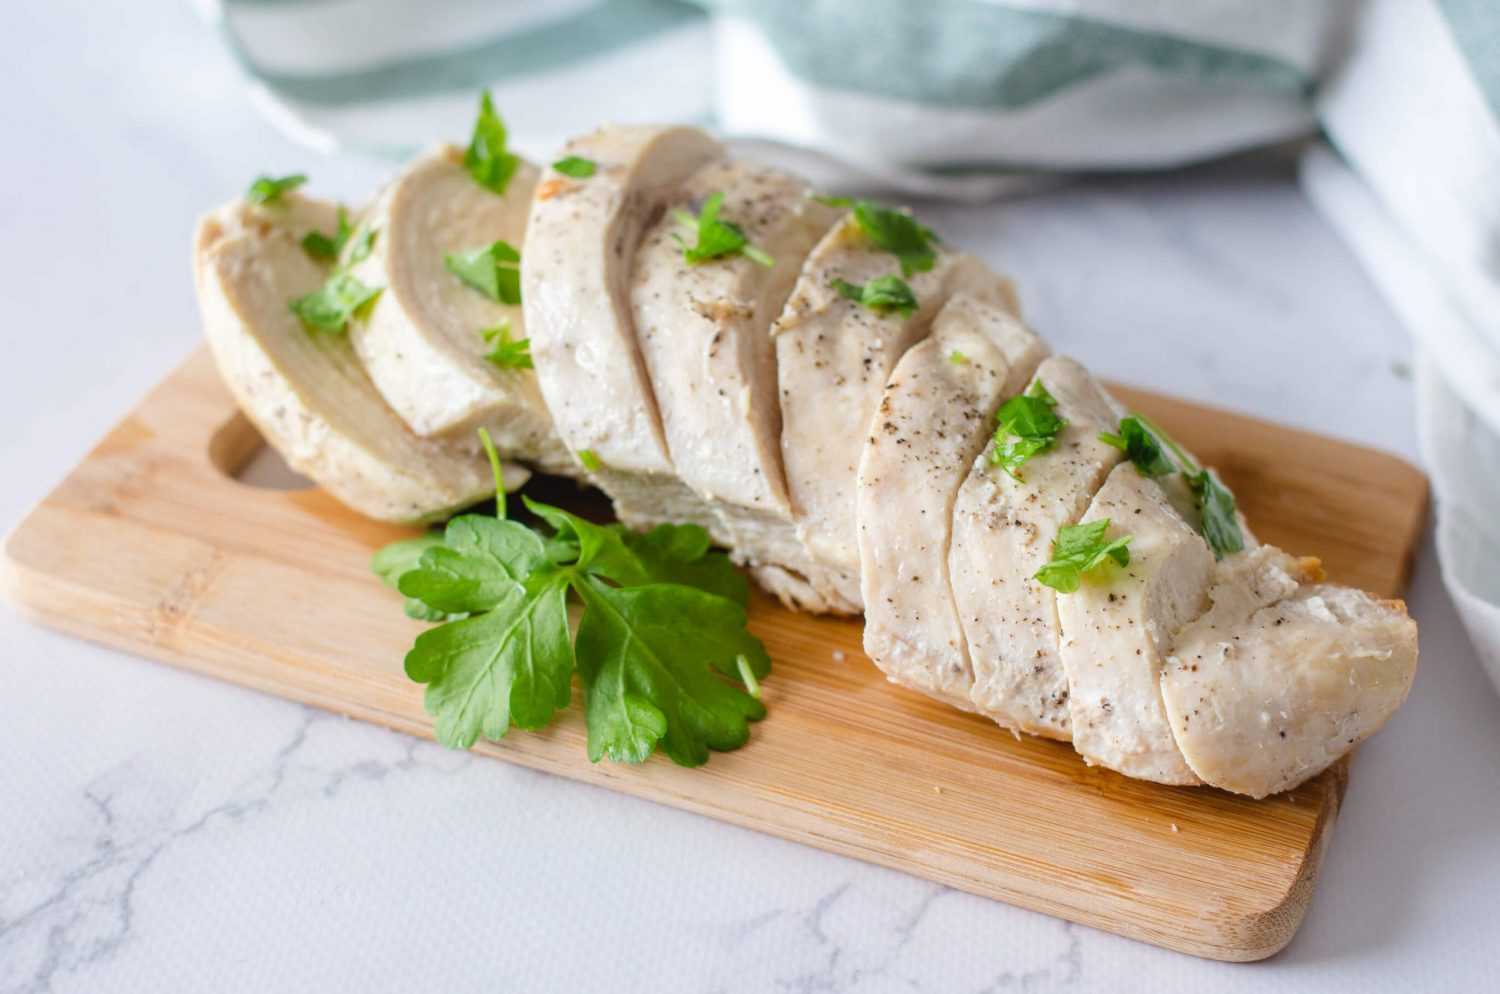 Turkey breast cut into slices with parsley and black pepper on cutter board